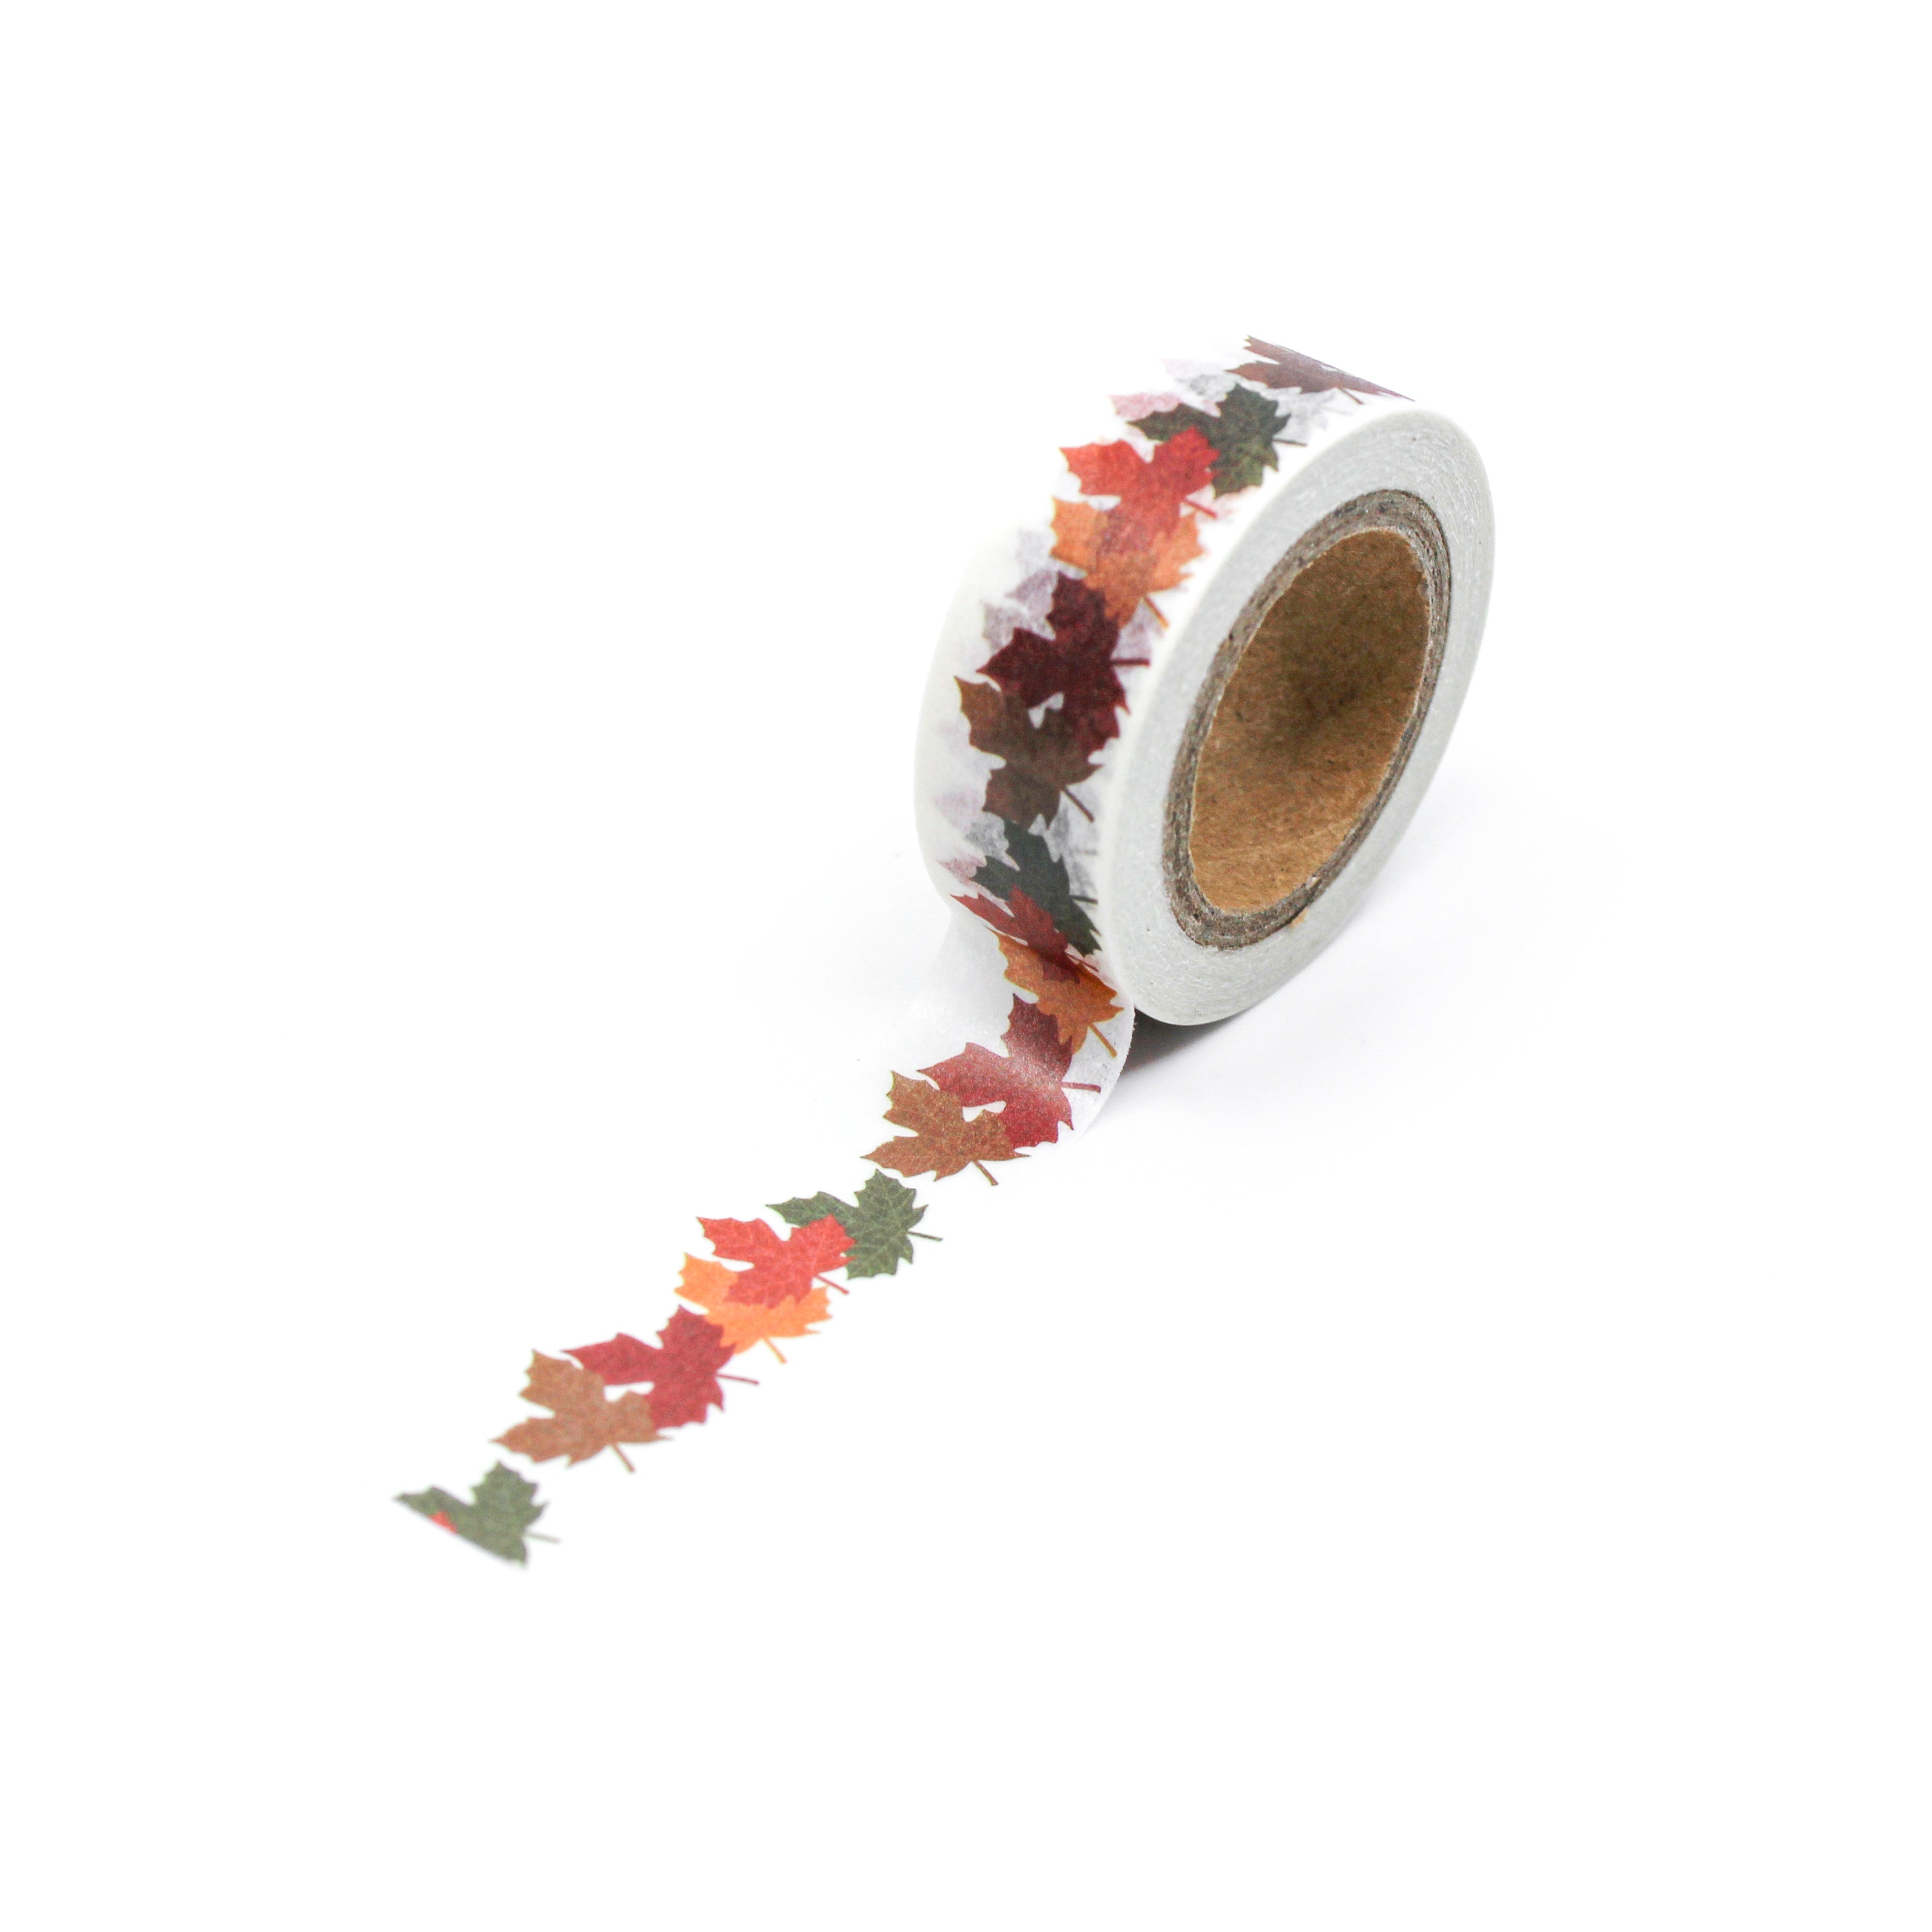 This is a full pattern repeat view of multi-color fall leave flowers washi tape from BBB Supplies Craft Shop